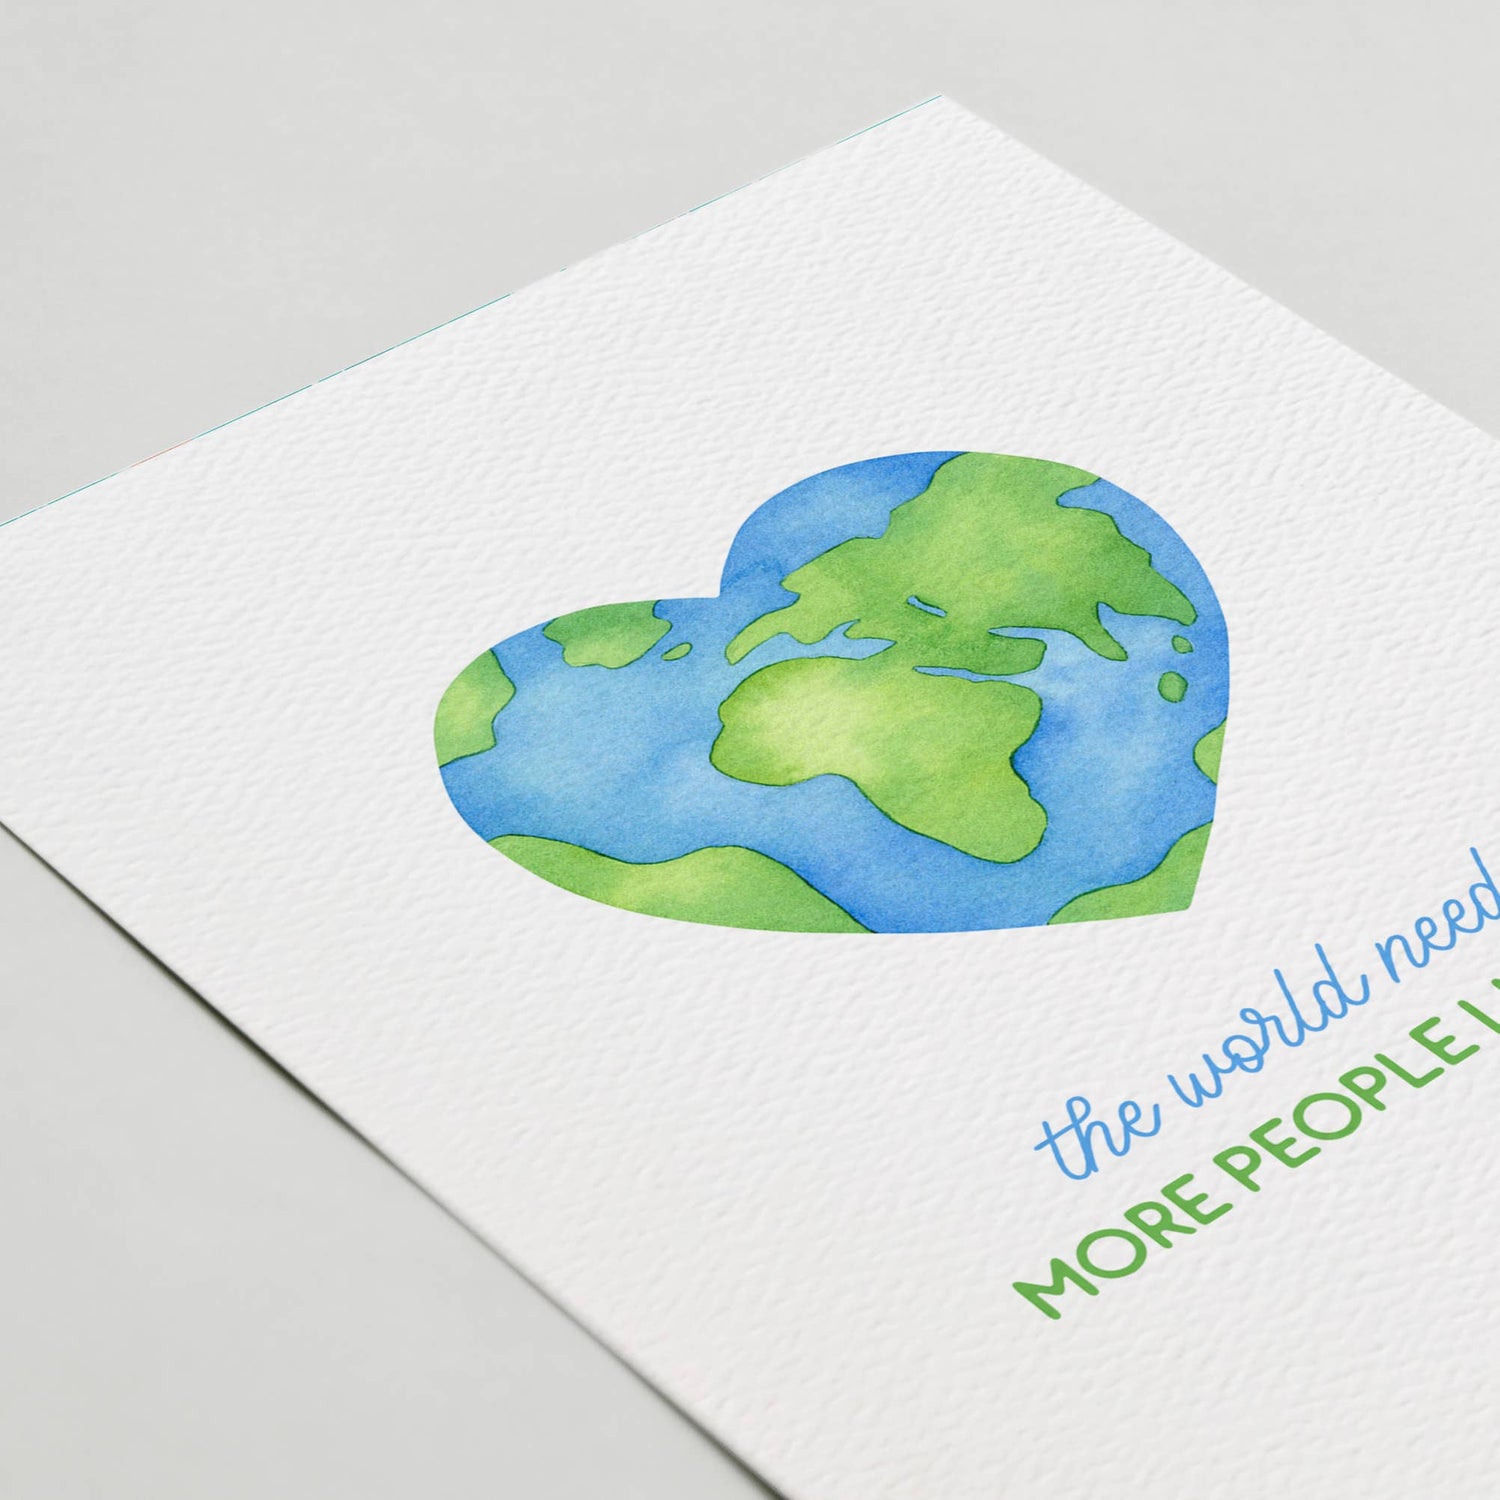 Greeting Card | The World Needs More People Like You